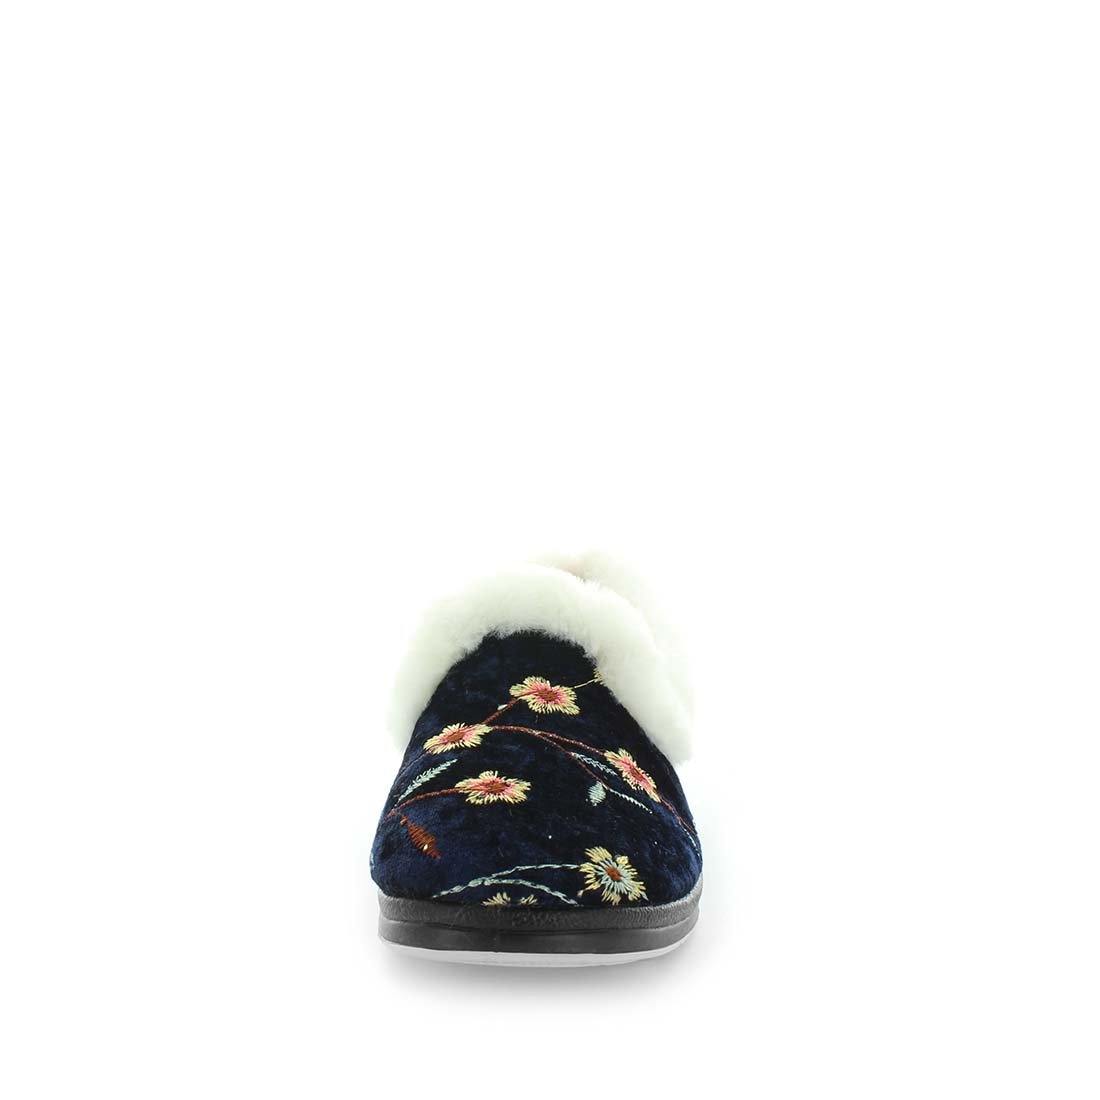 Classic womens slip on slipper, Emille by panda slippers. A navy slipper made with soft materials and comfy fit design for the perfect indoor slipper. showing a non slip sole and micro terry trimming,